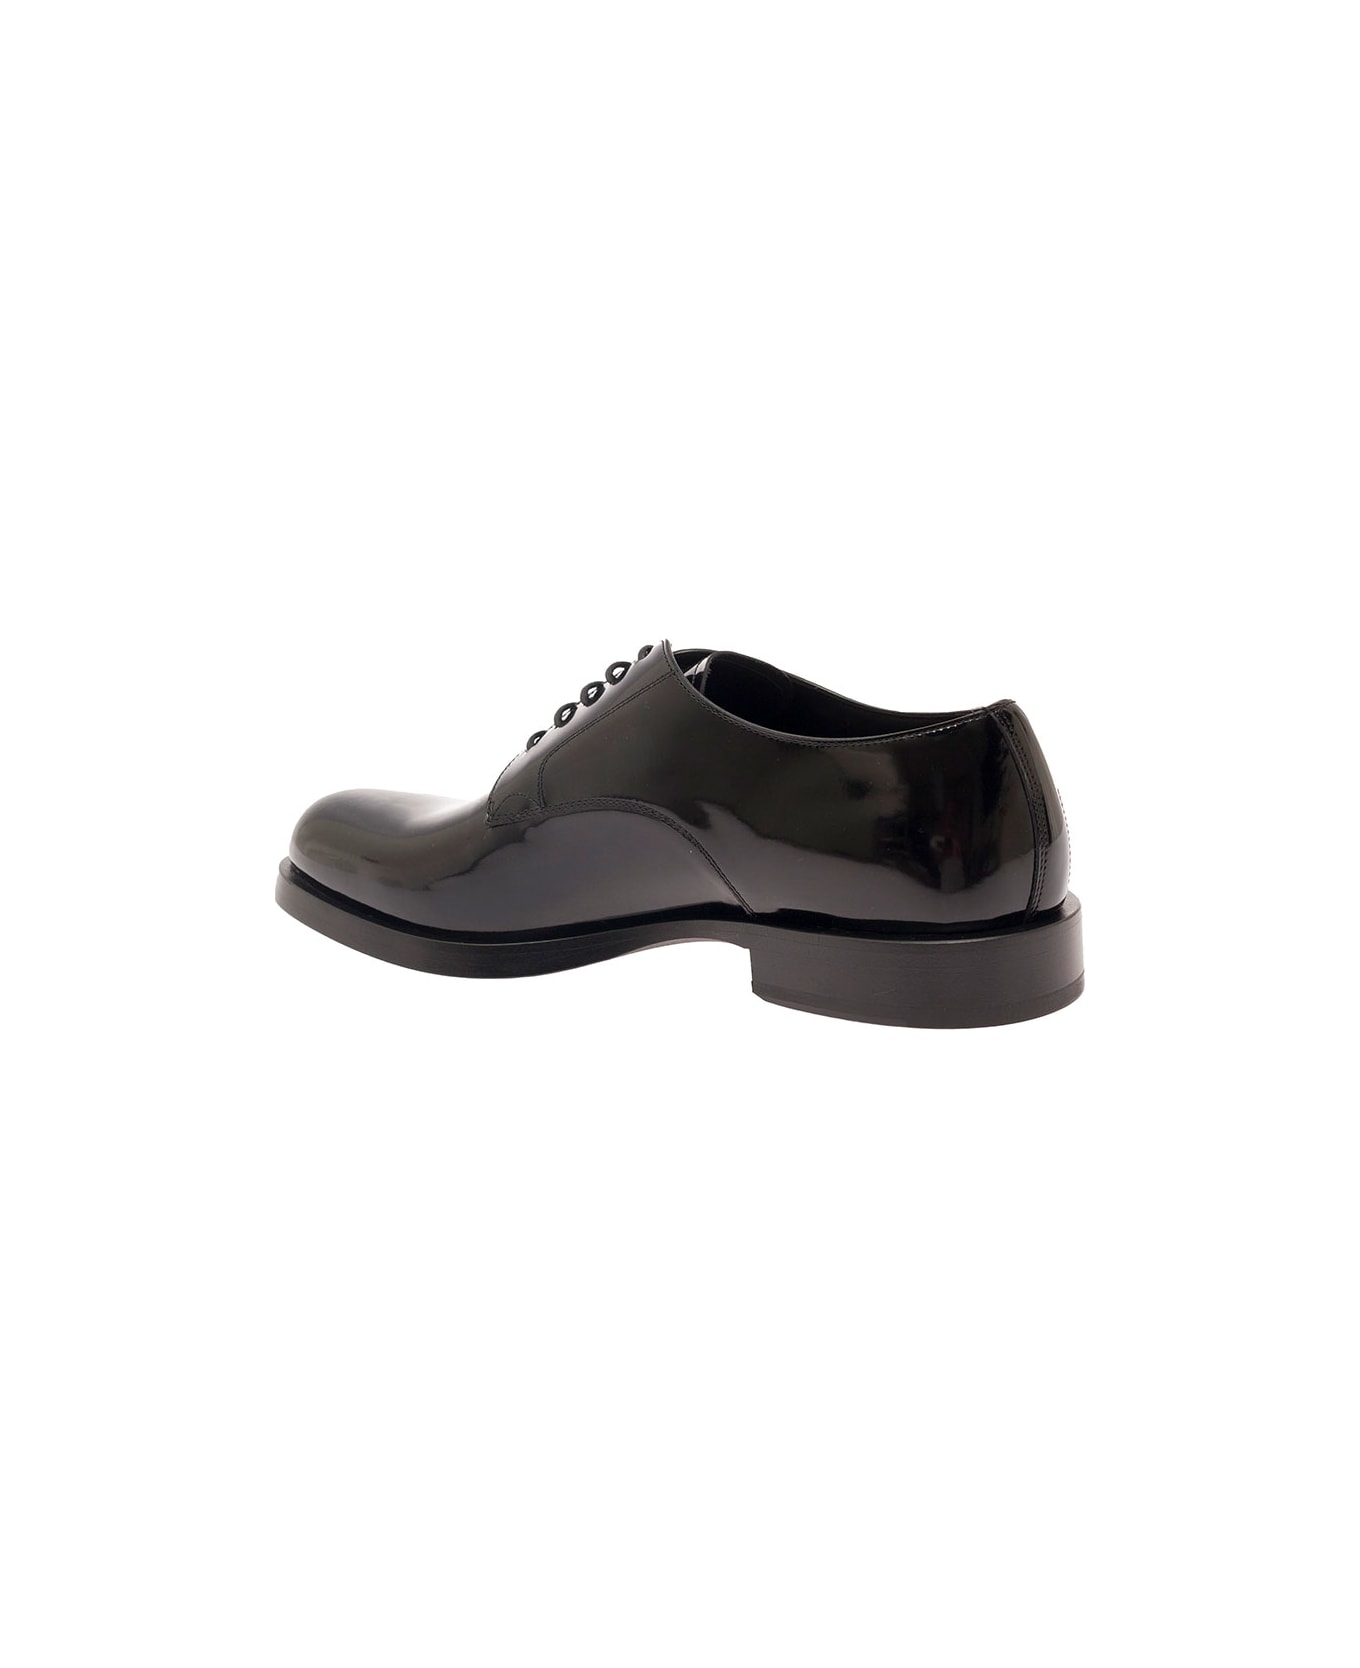 Dolce & Gabbana Black Derby Shoes With Branded Outsole In Polished Leather Woman - Black